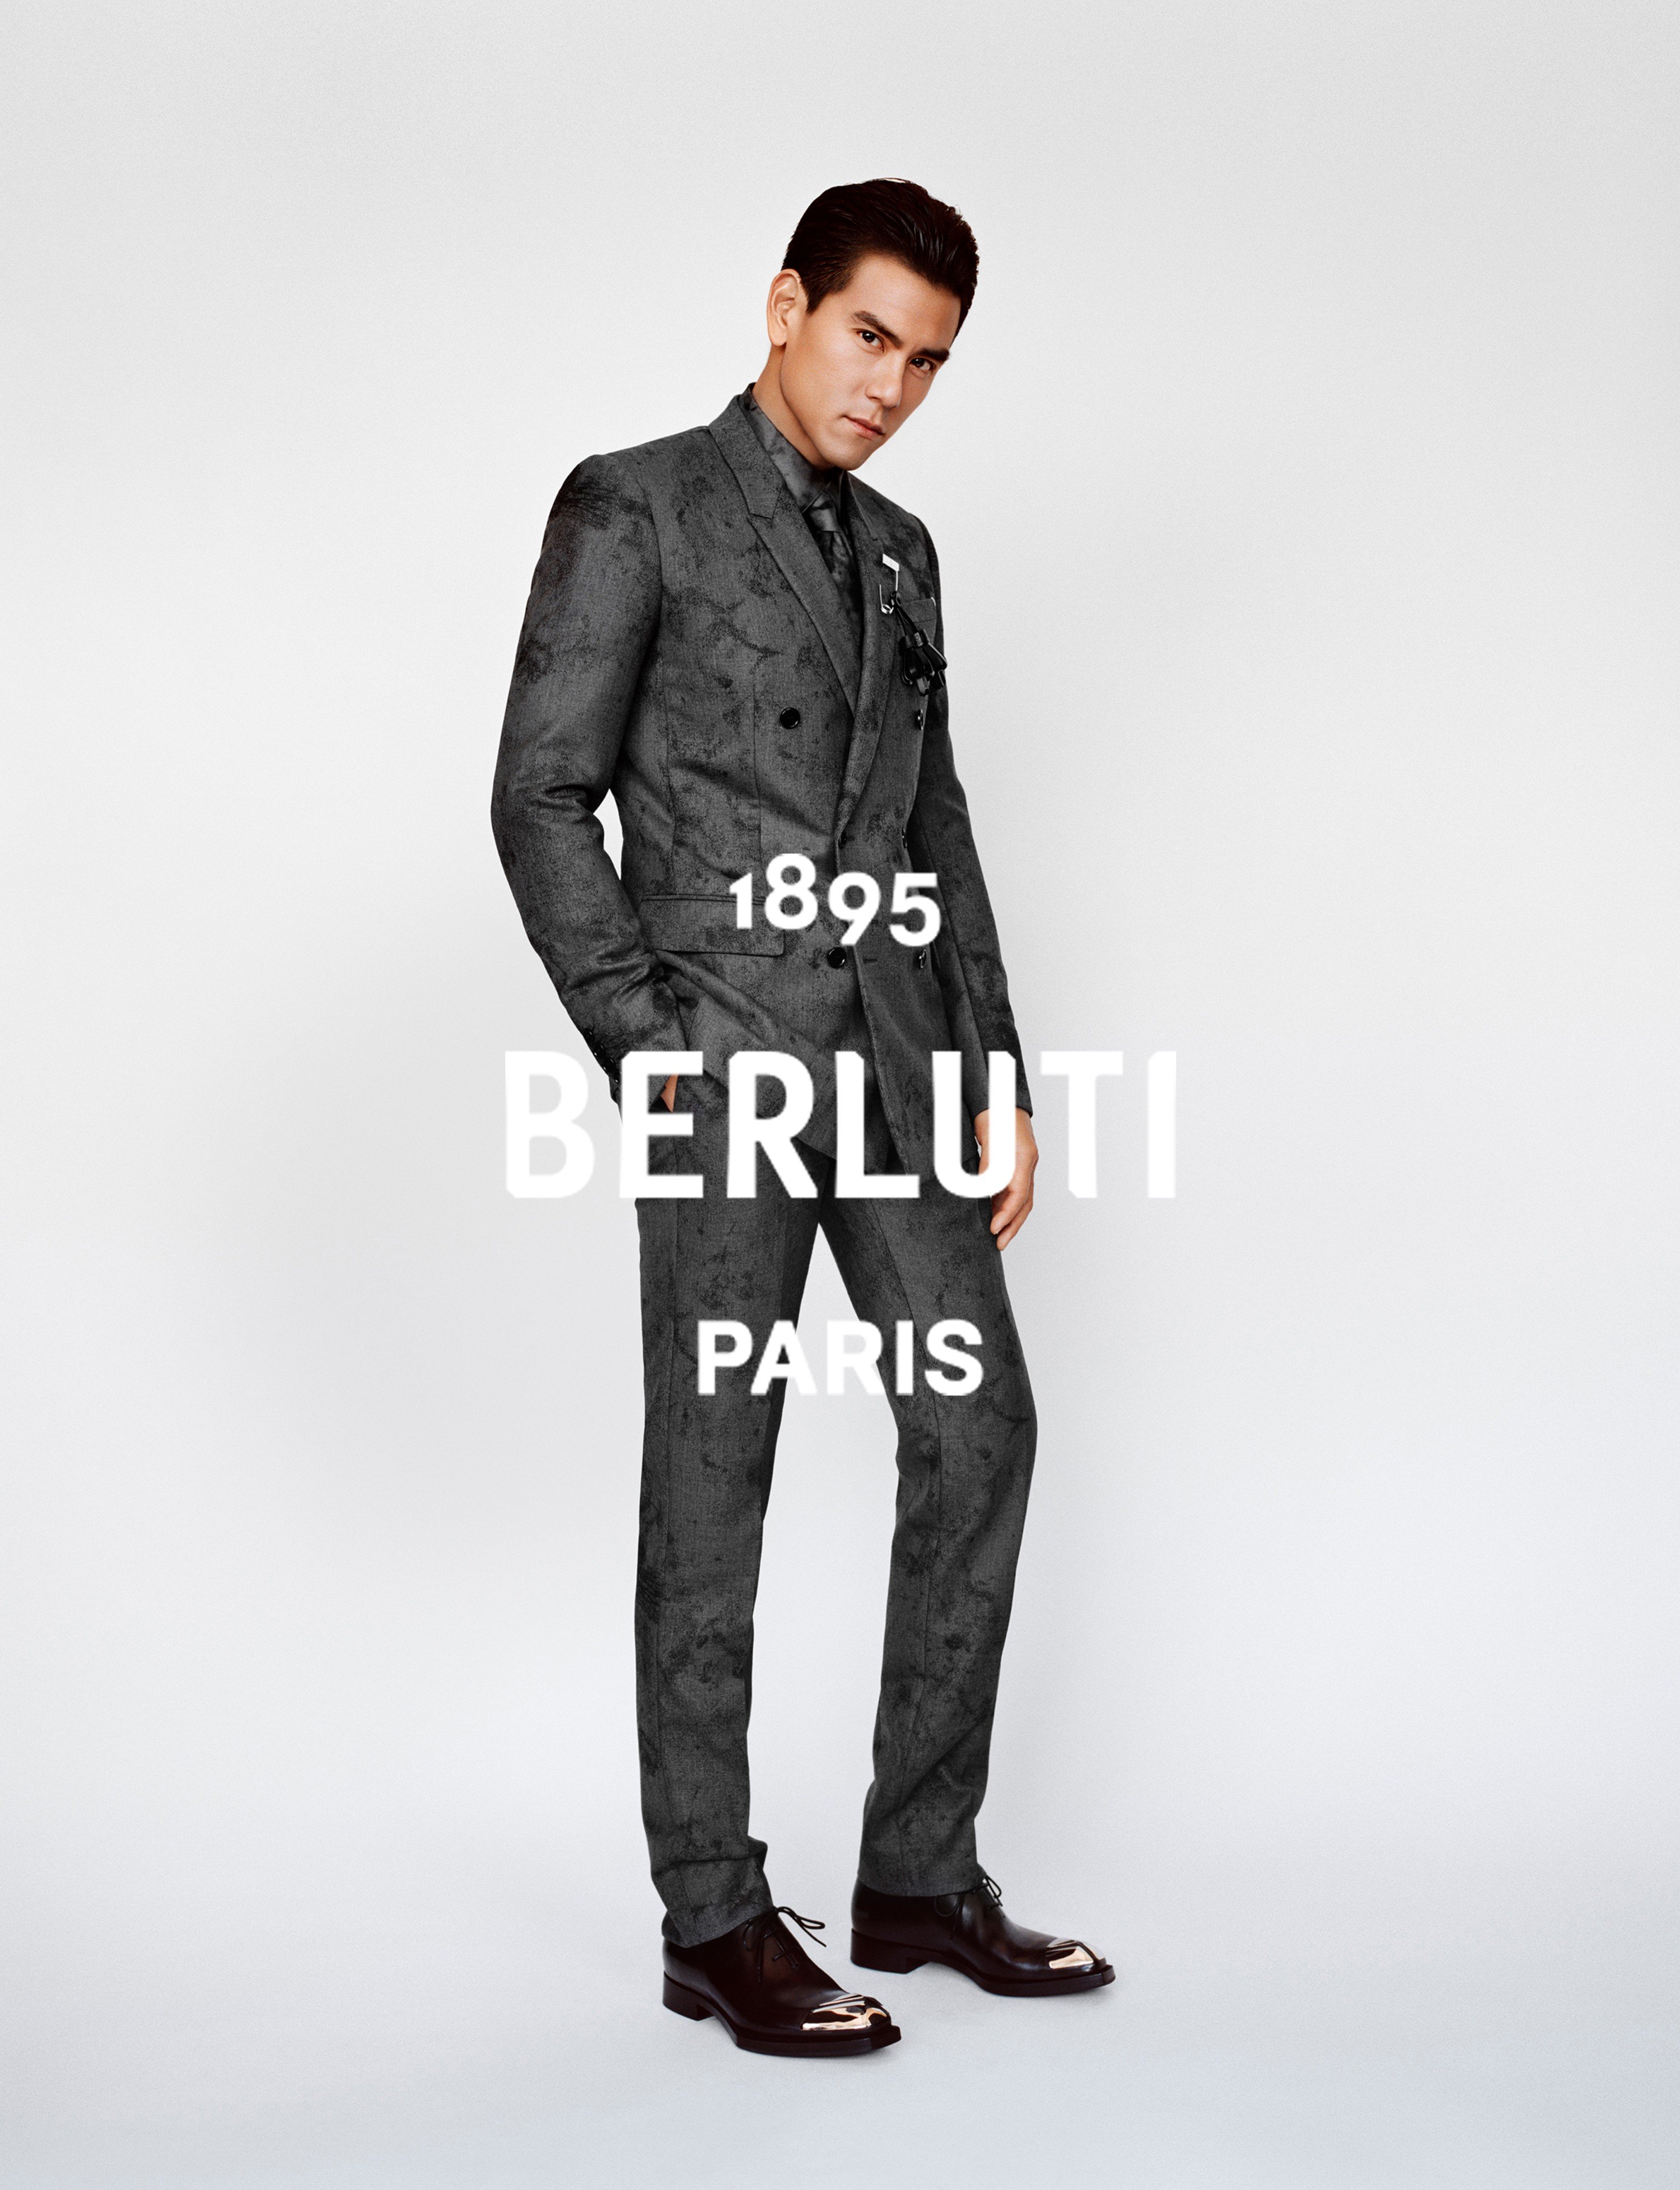 Eddie Peng, the Taiwanese-Canadian actor, singer and model, here dressed in a formal grey wool marble suit with a matching silk shirt, is brand ambassador for menswear company Berluti’s new winter 2019 collection.